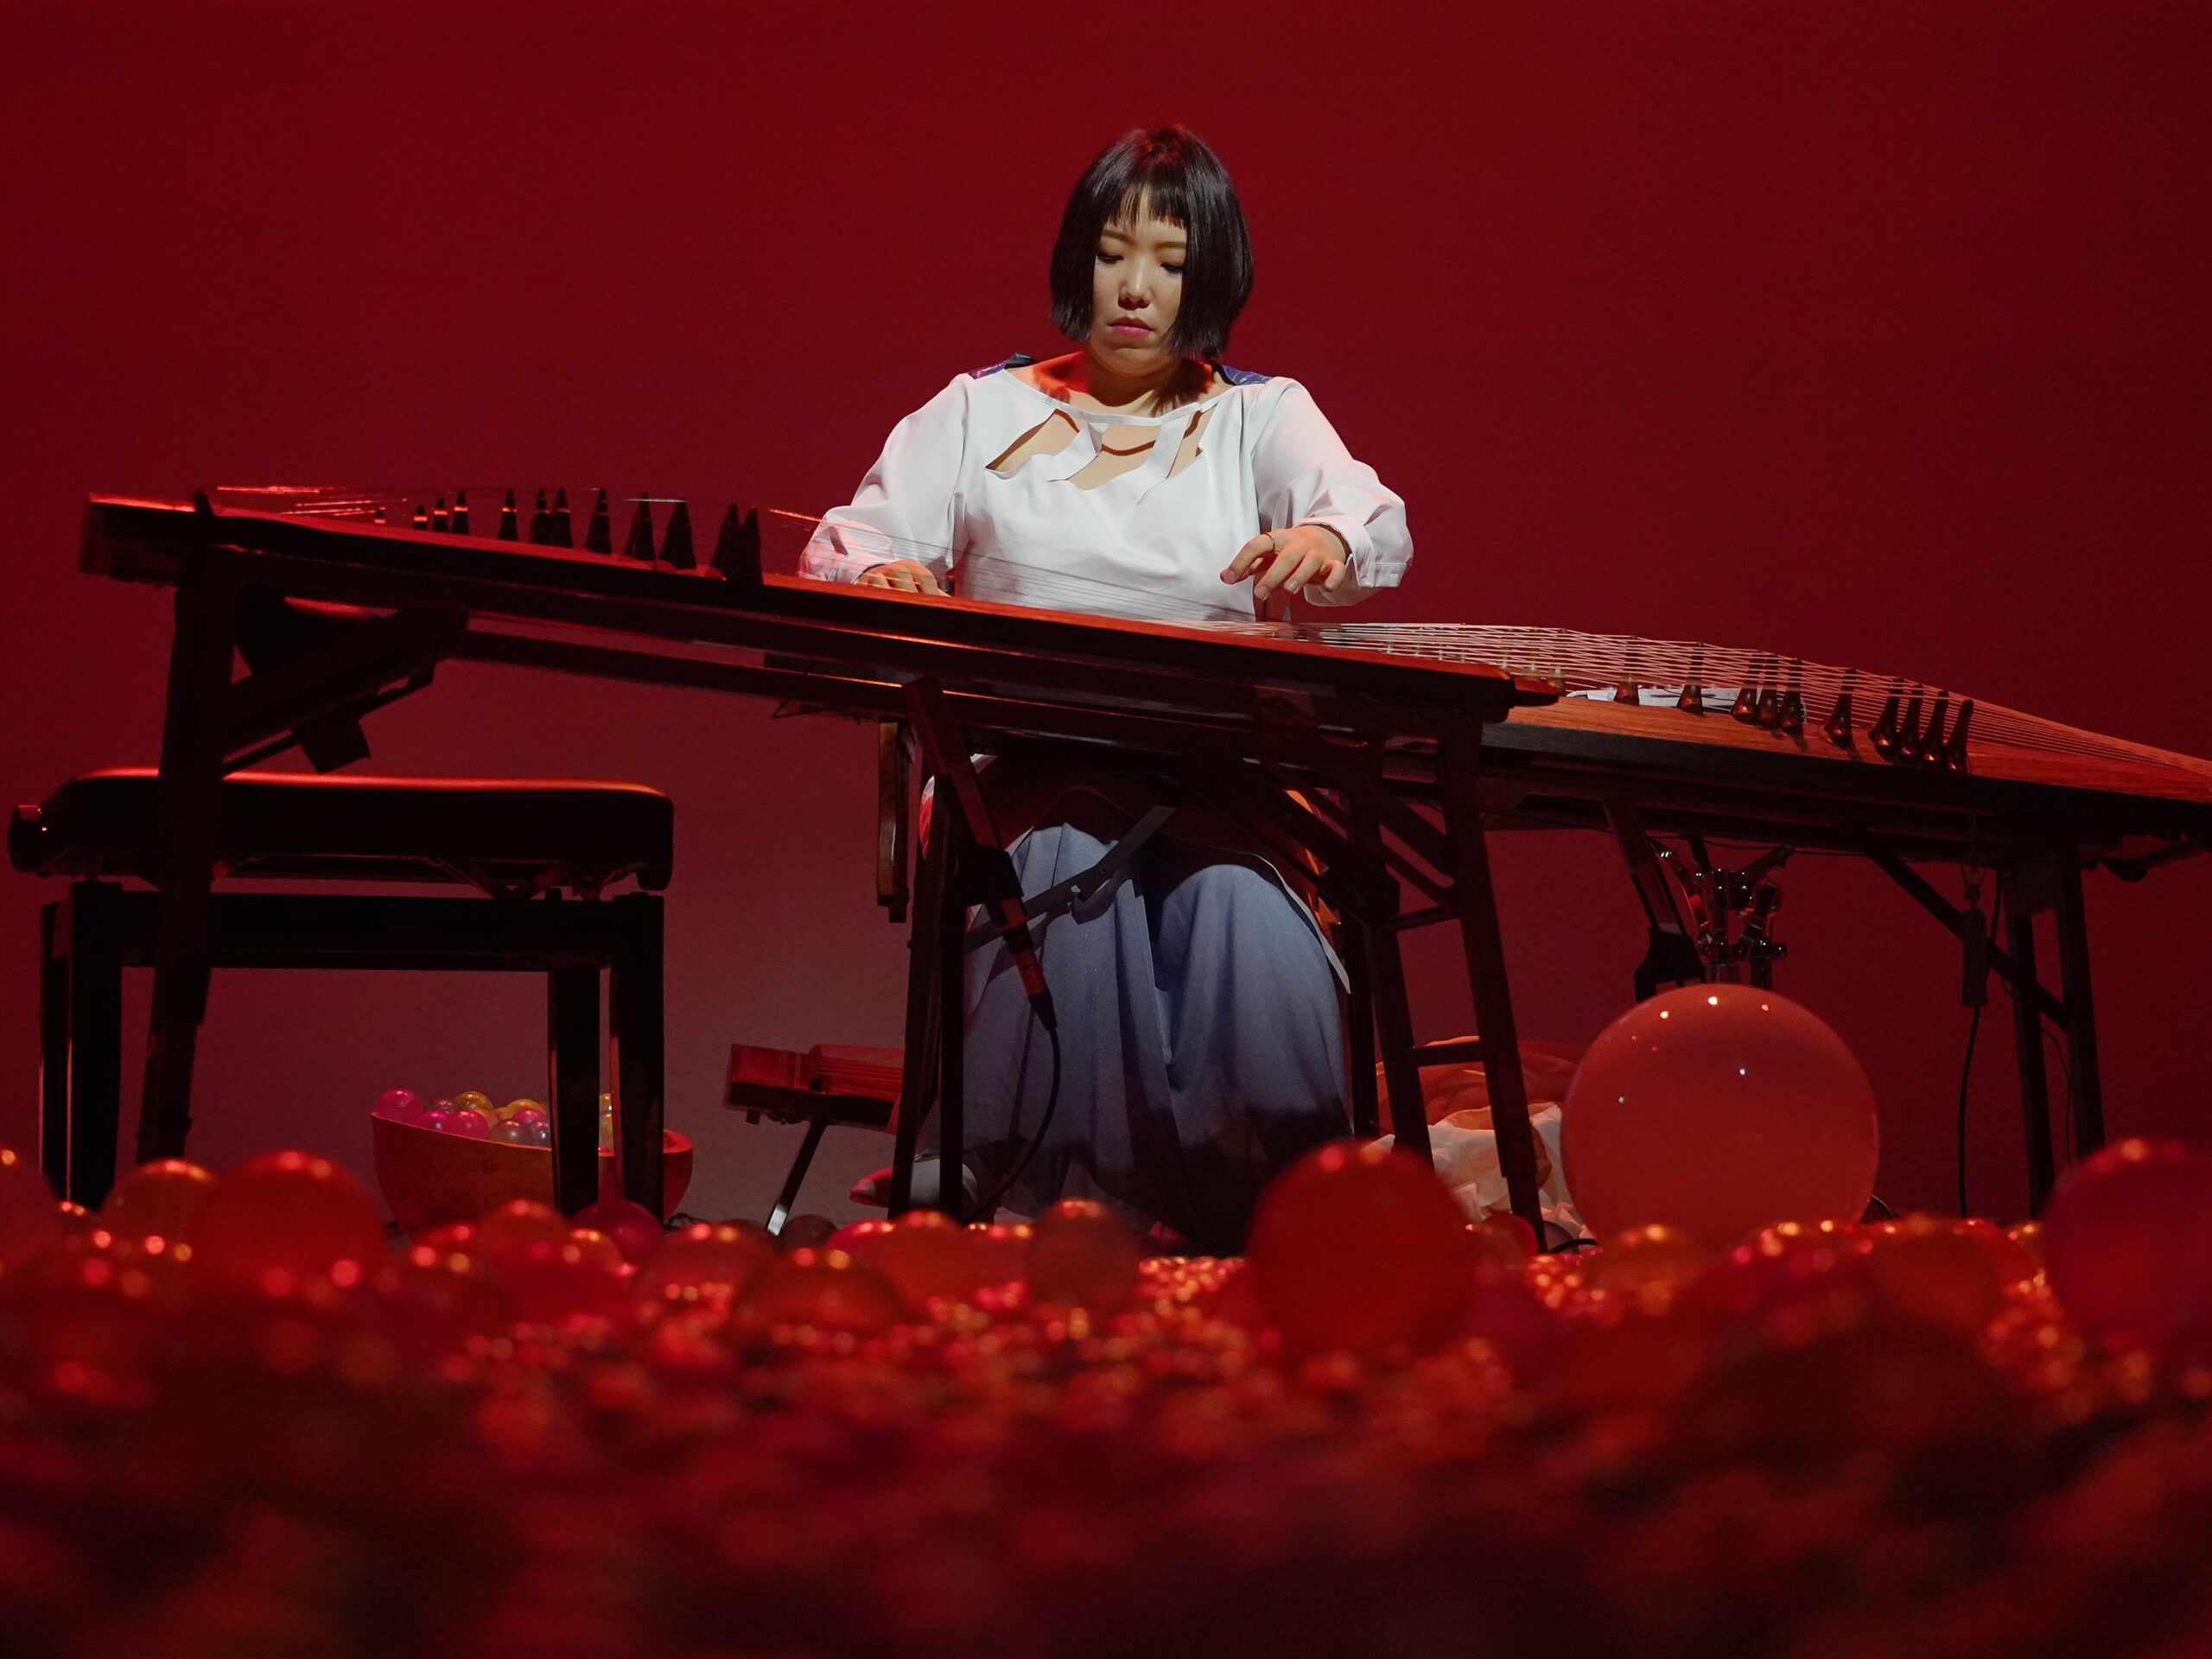 Color photo of Gayageum artist Seo Jungmin. Seo sits center playing the Gayageum. Multicolor balls of all sizes and colors cover the ground at her feet. Bathed in red light she wears a white blouse and grey slacks.